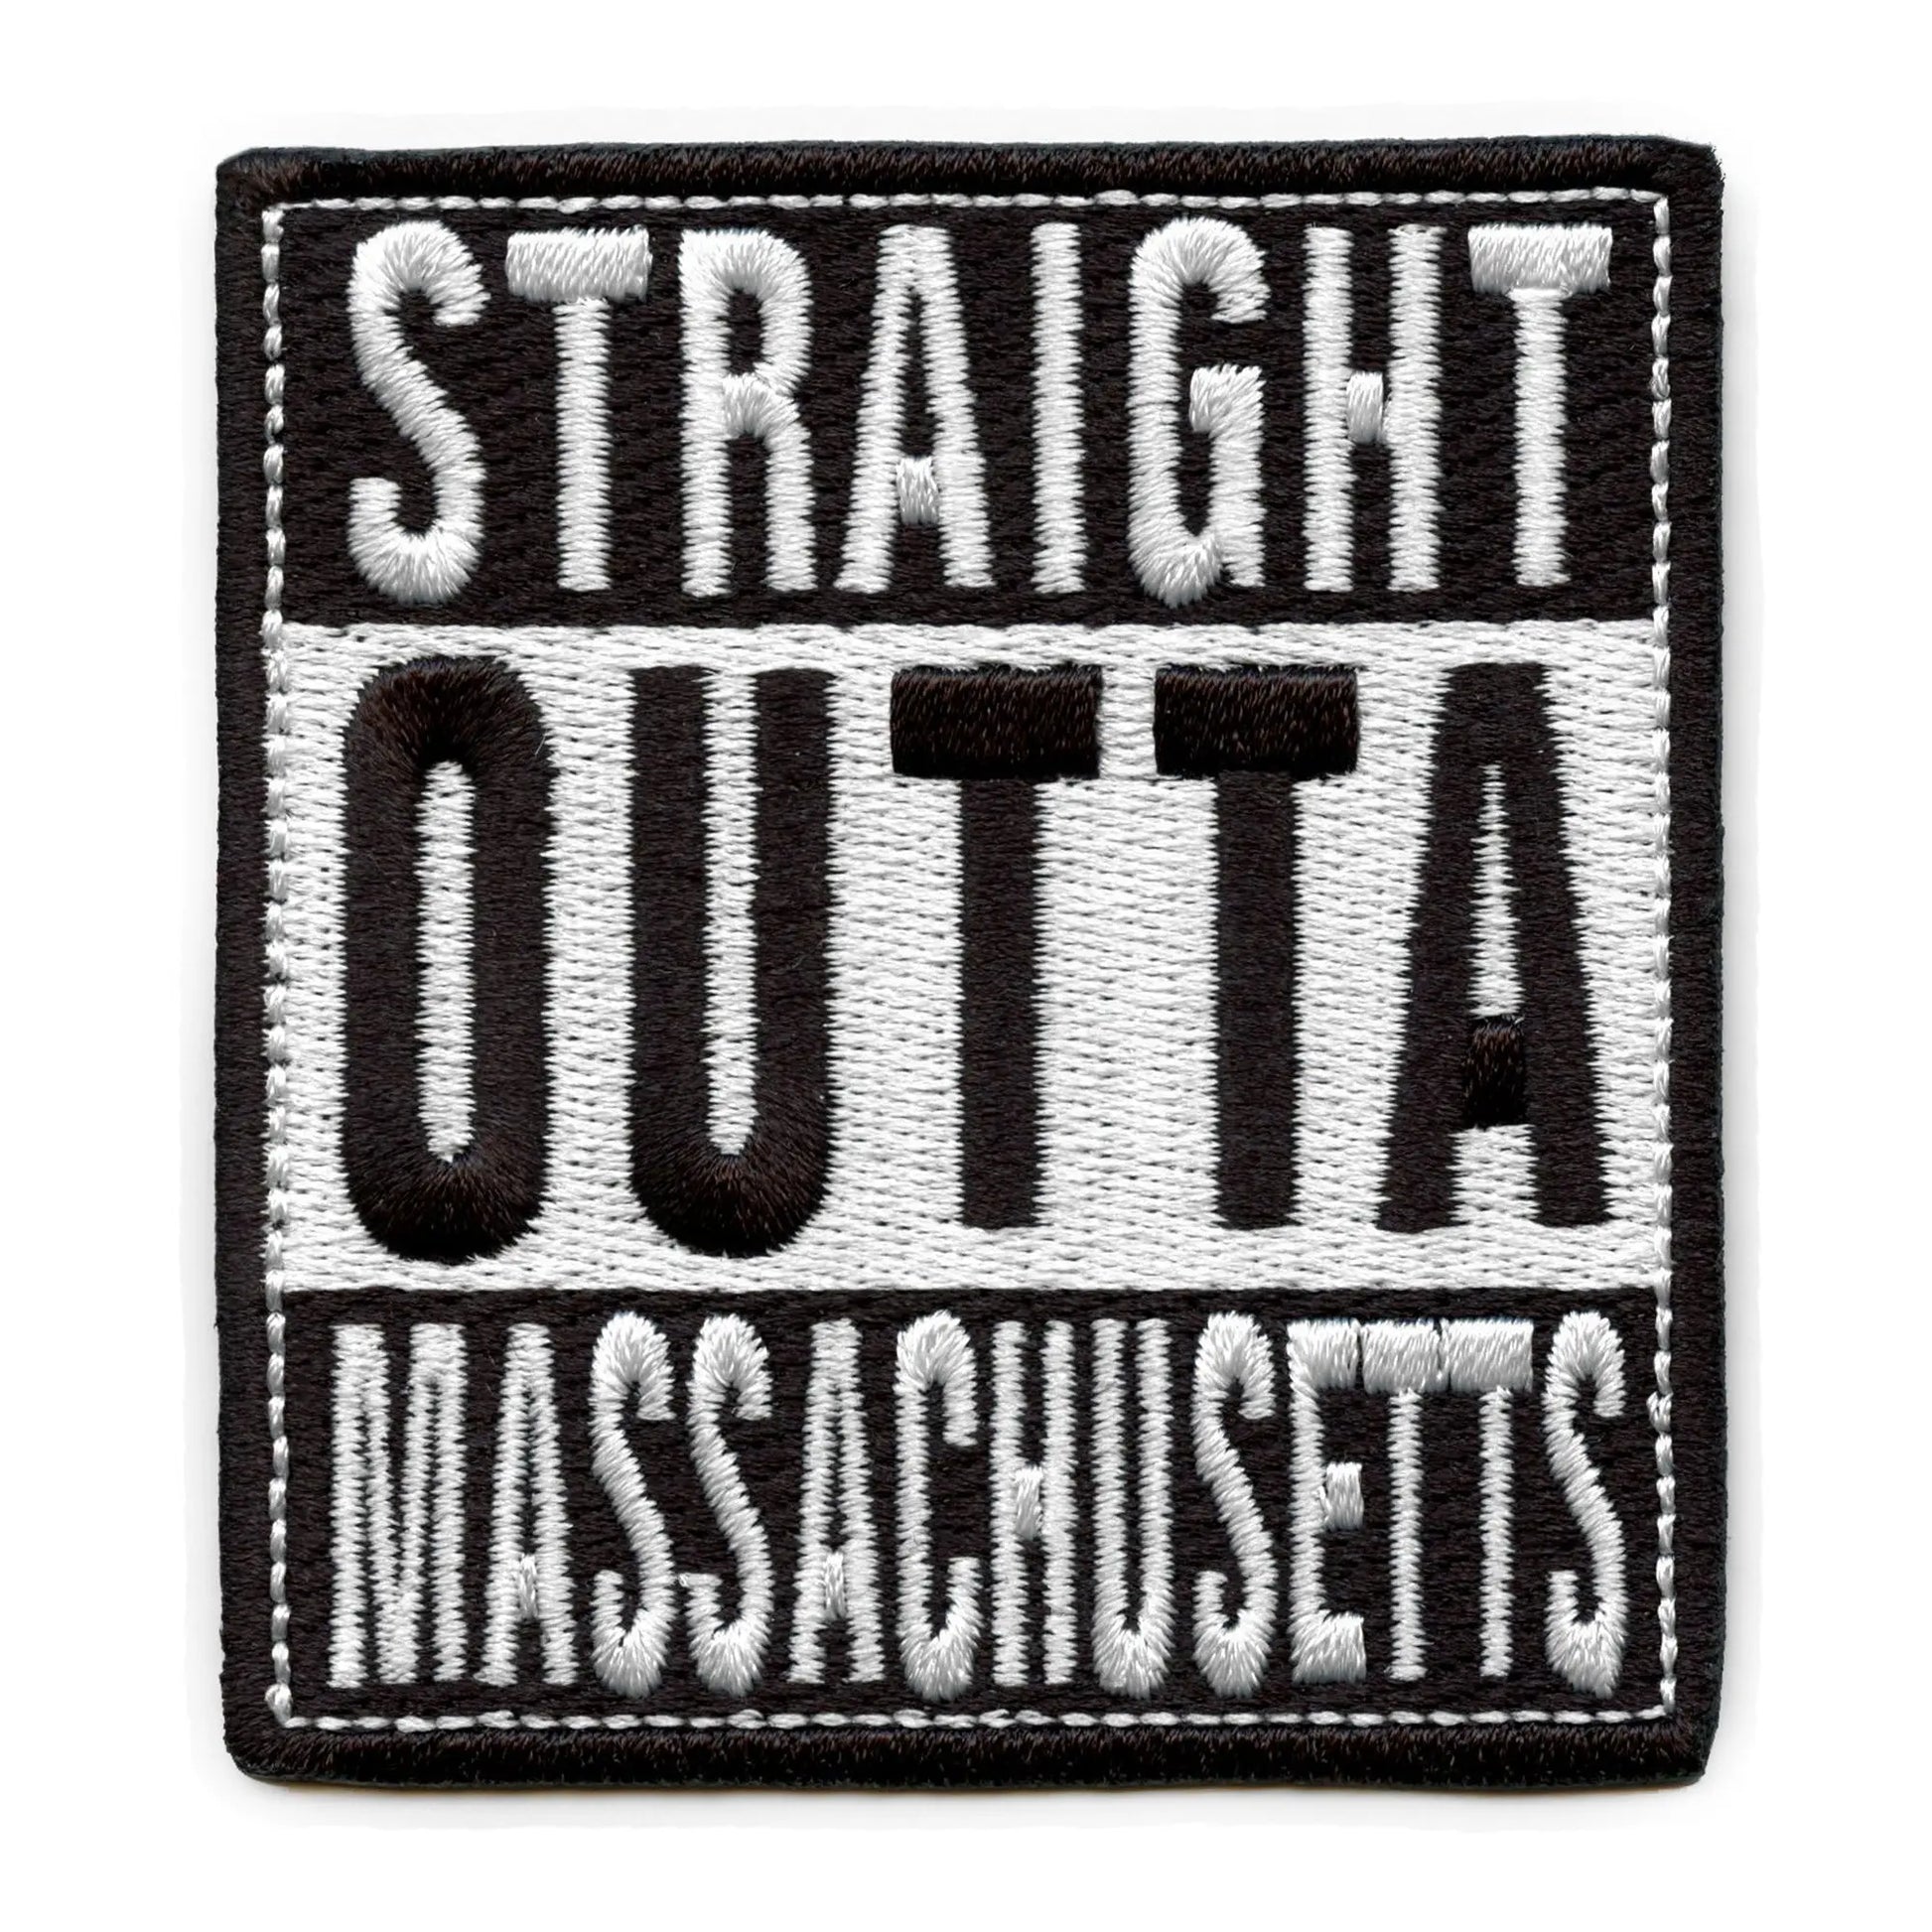 Straight Outta Massachusetts Patch Embroidered Iron On 